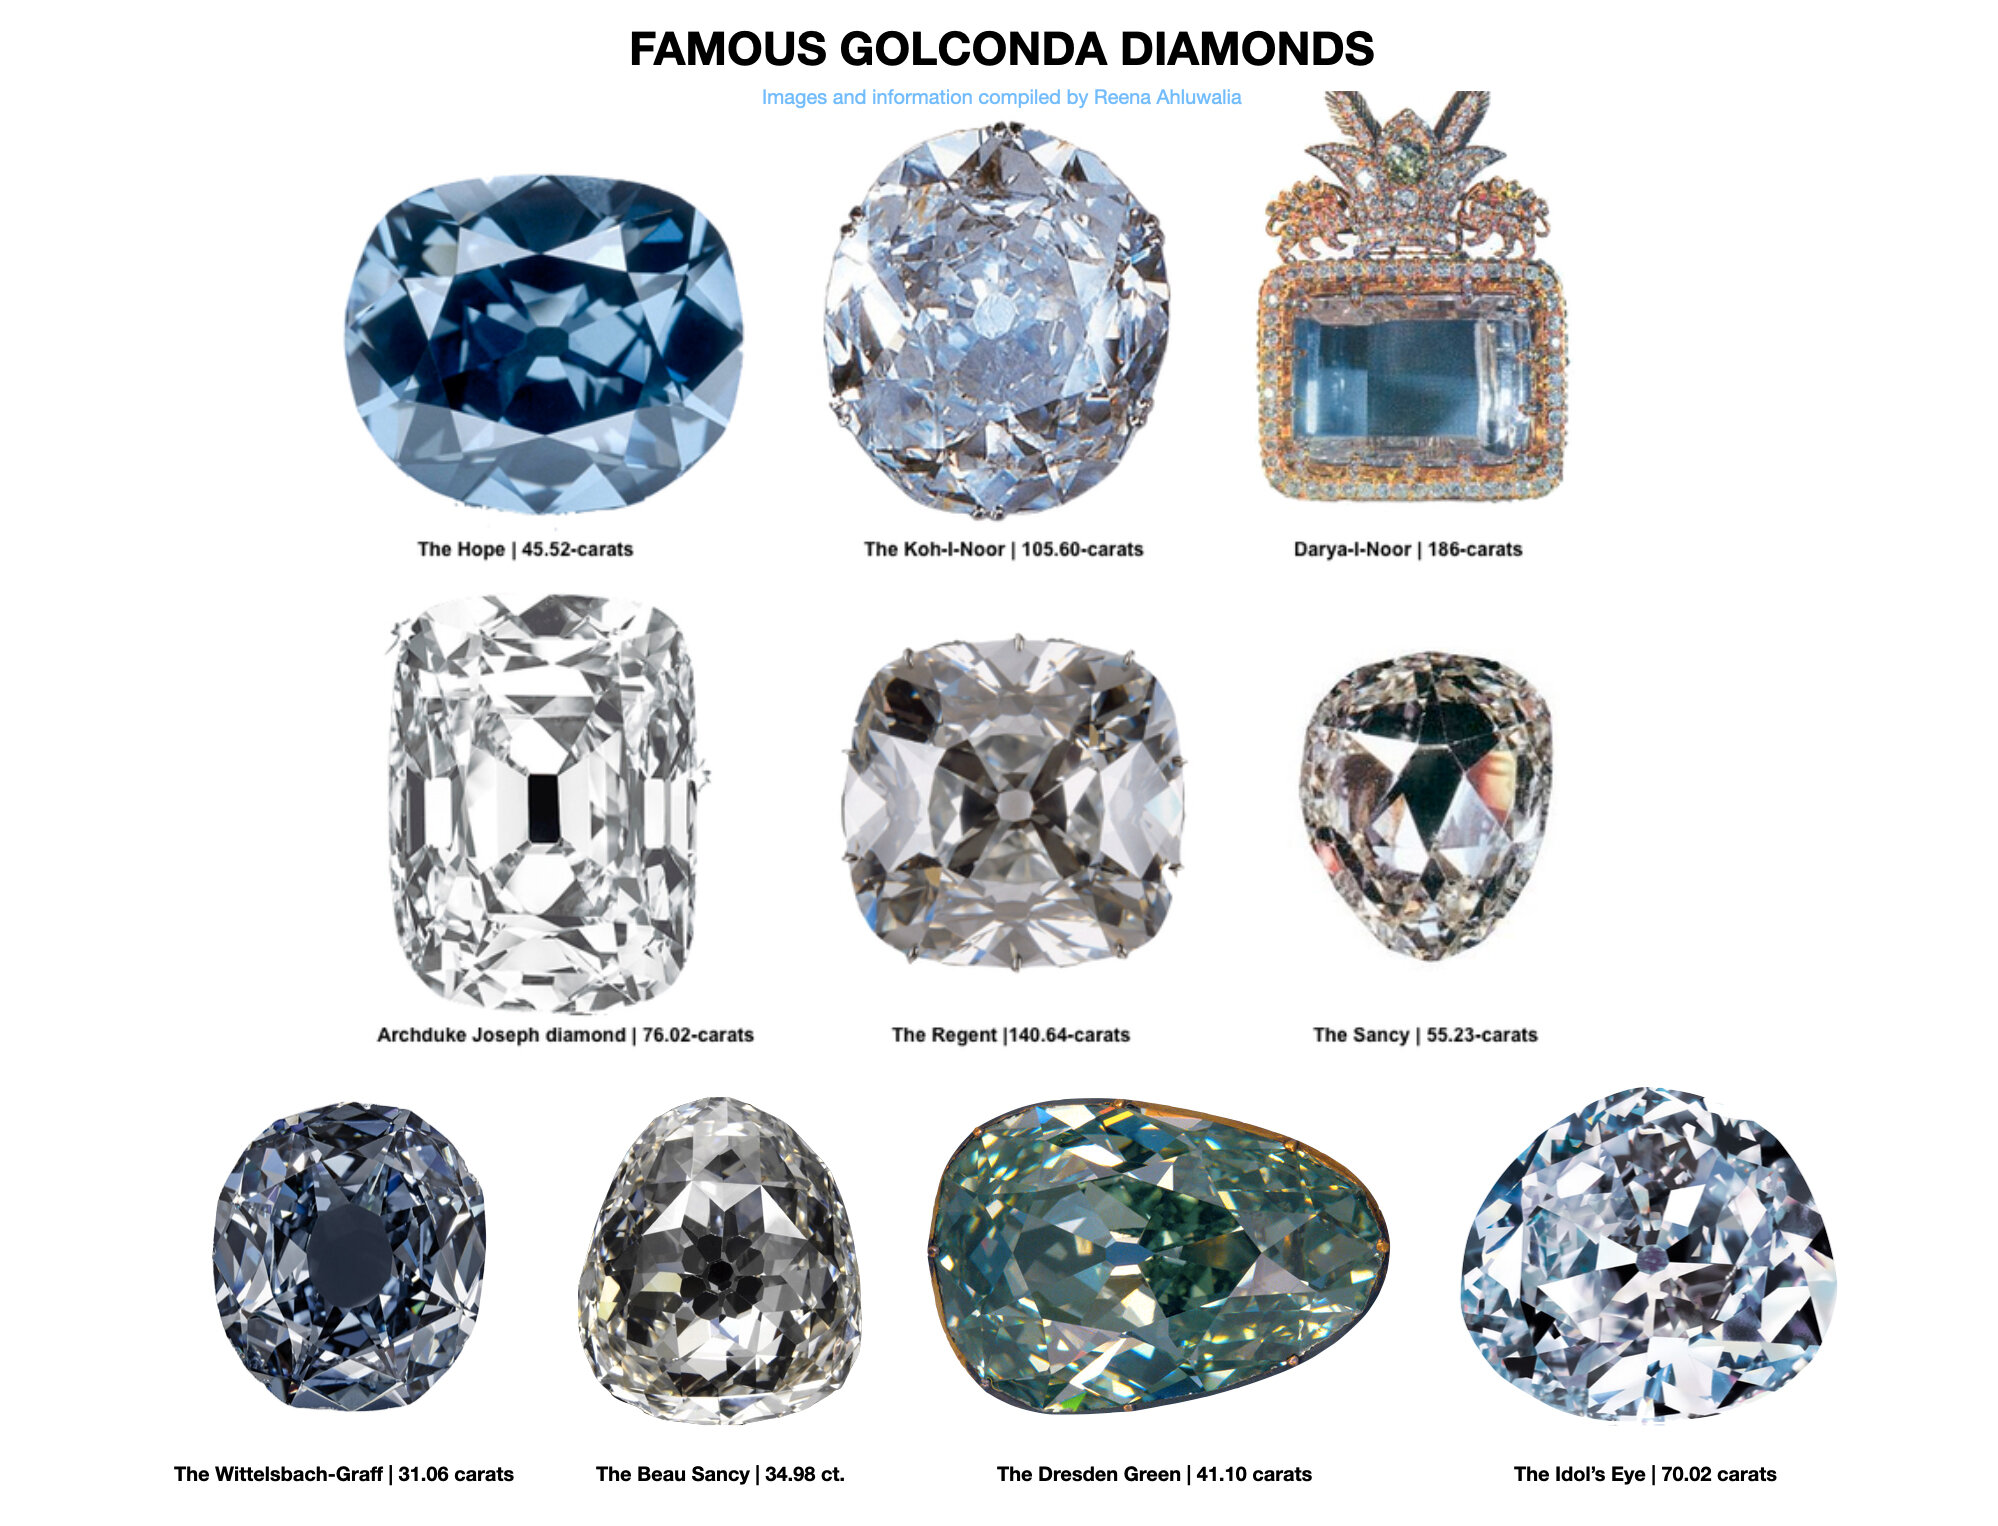 Koh-i-Noor to Hope: 5 of the most expensive diamonds in the world